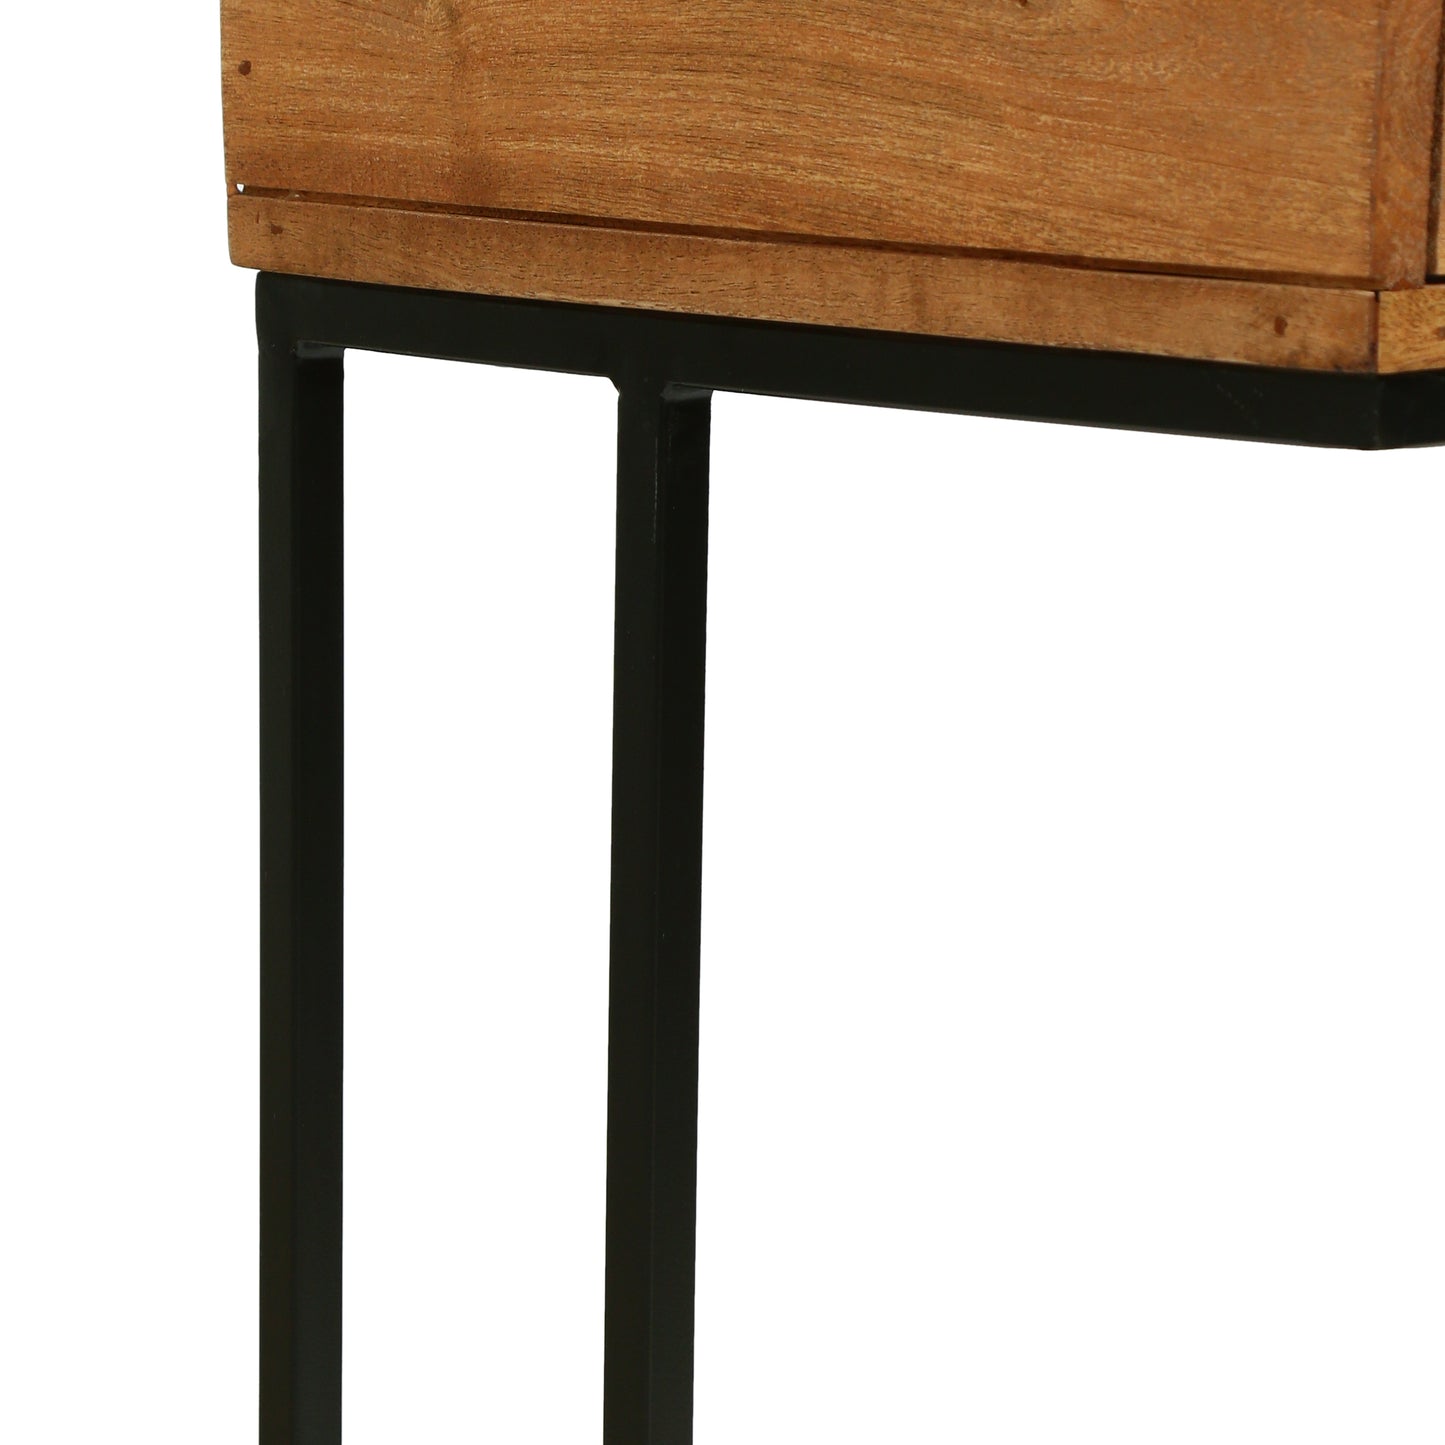 Wickson Modern Industrial Handmade Mango Wood C-Shaped Side Table with Drawer, Natural and Black